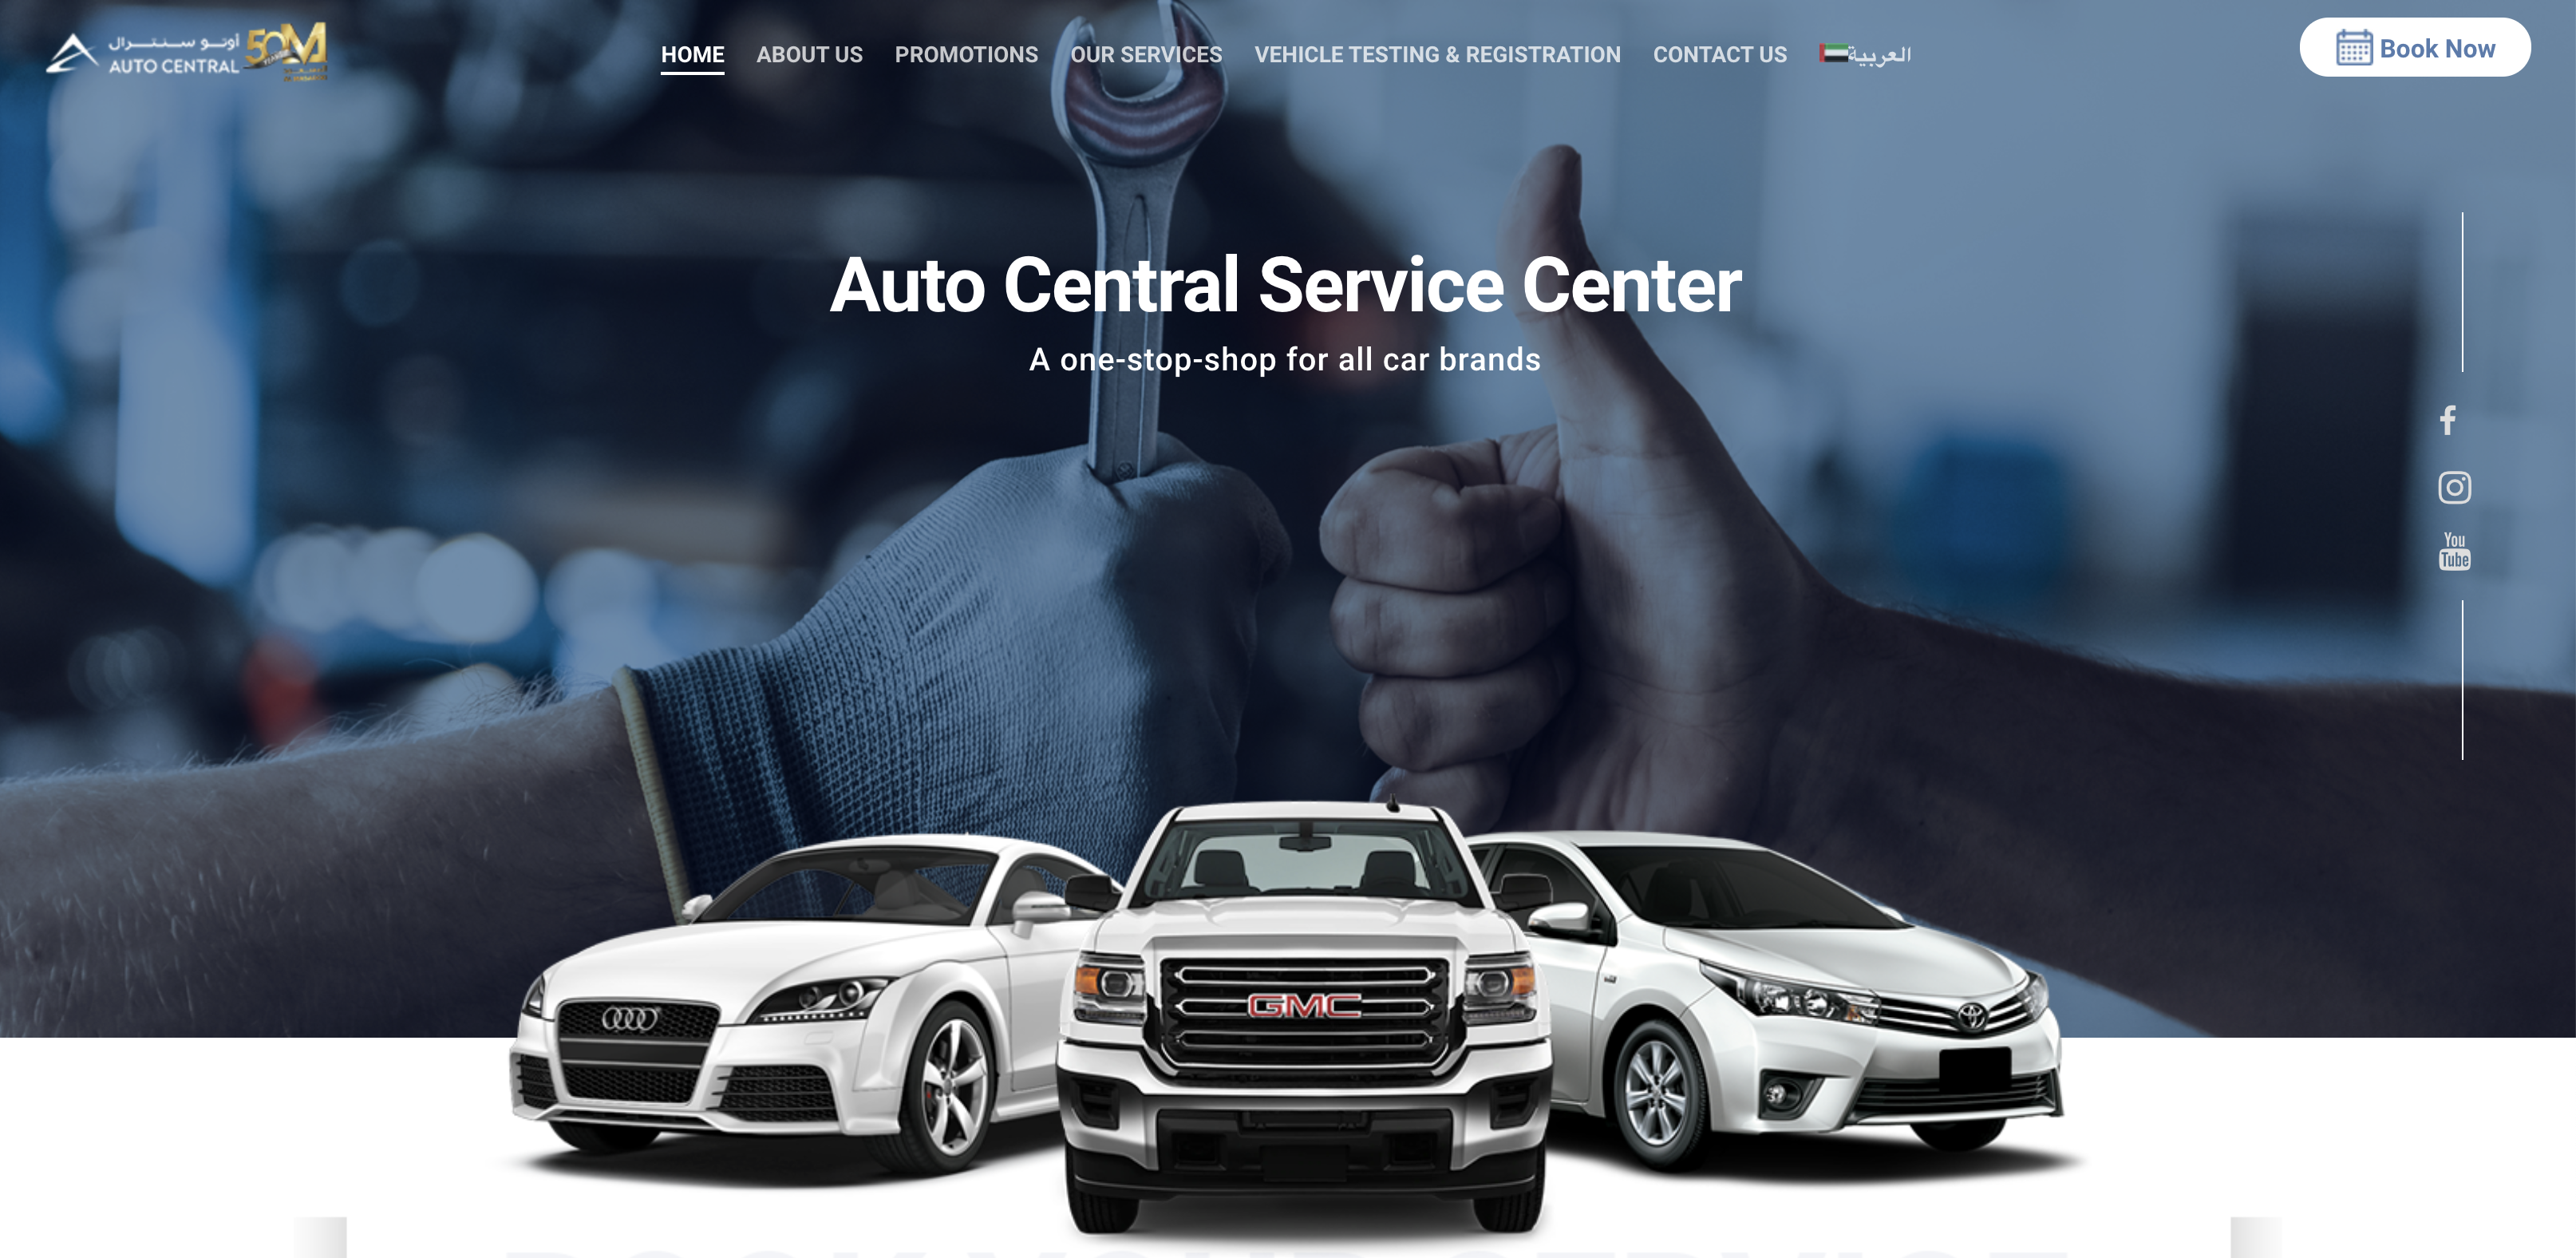 Auto Central Launches Its Brand-new Website 